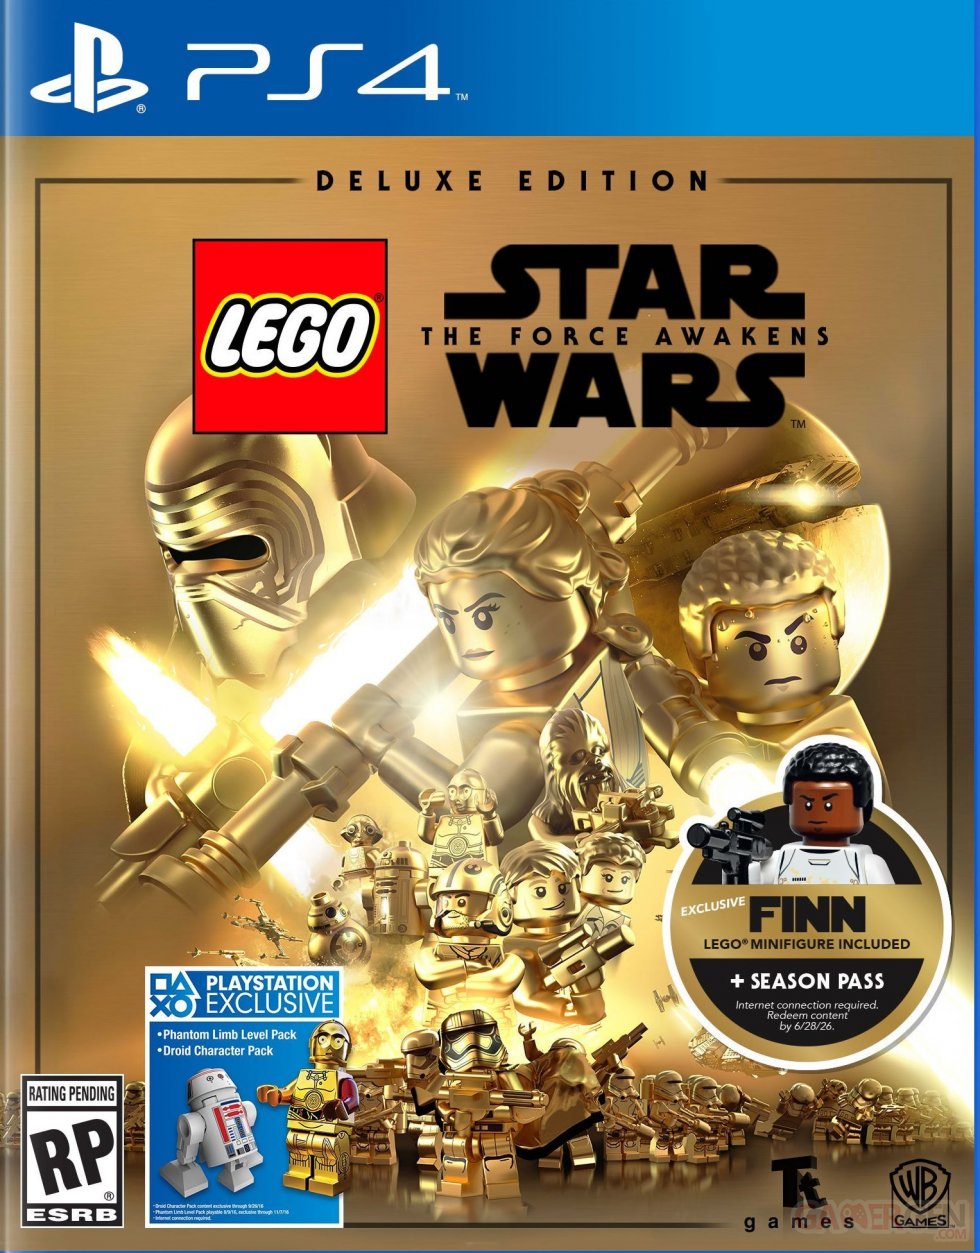 LEGO Star Wars Deluxe Edition